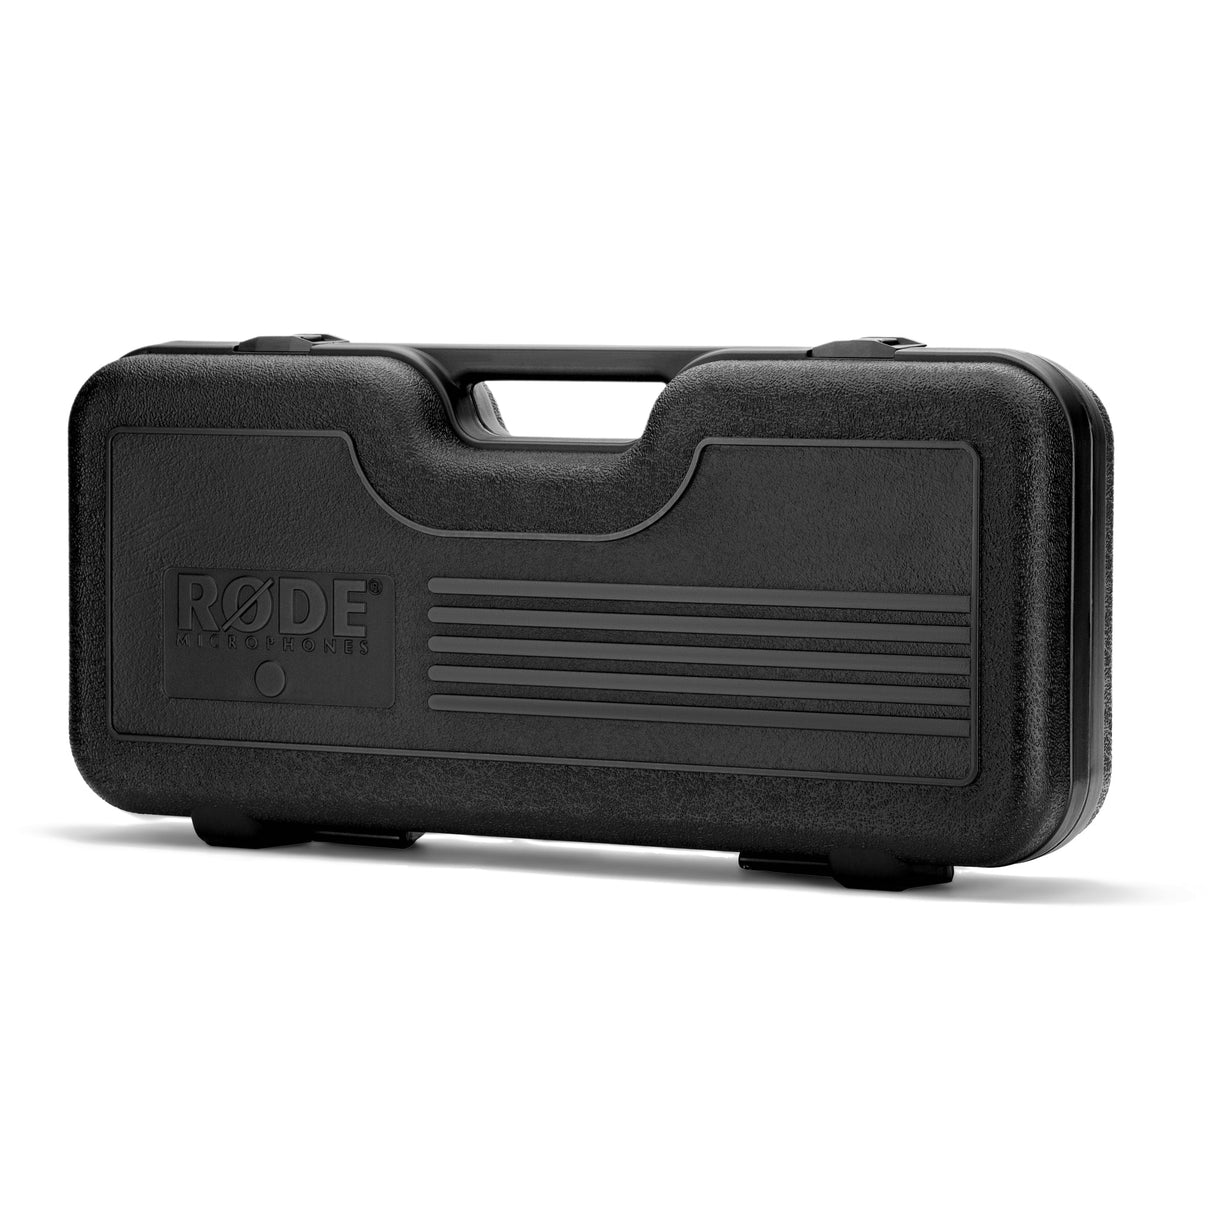 RODE RC2 Rugged Microphone Case for K2 and NTK